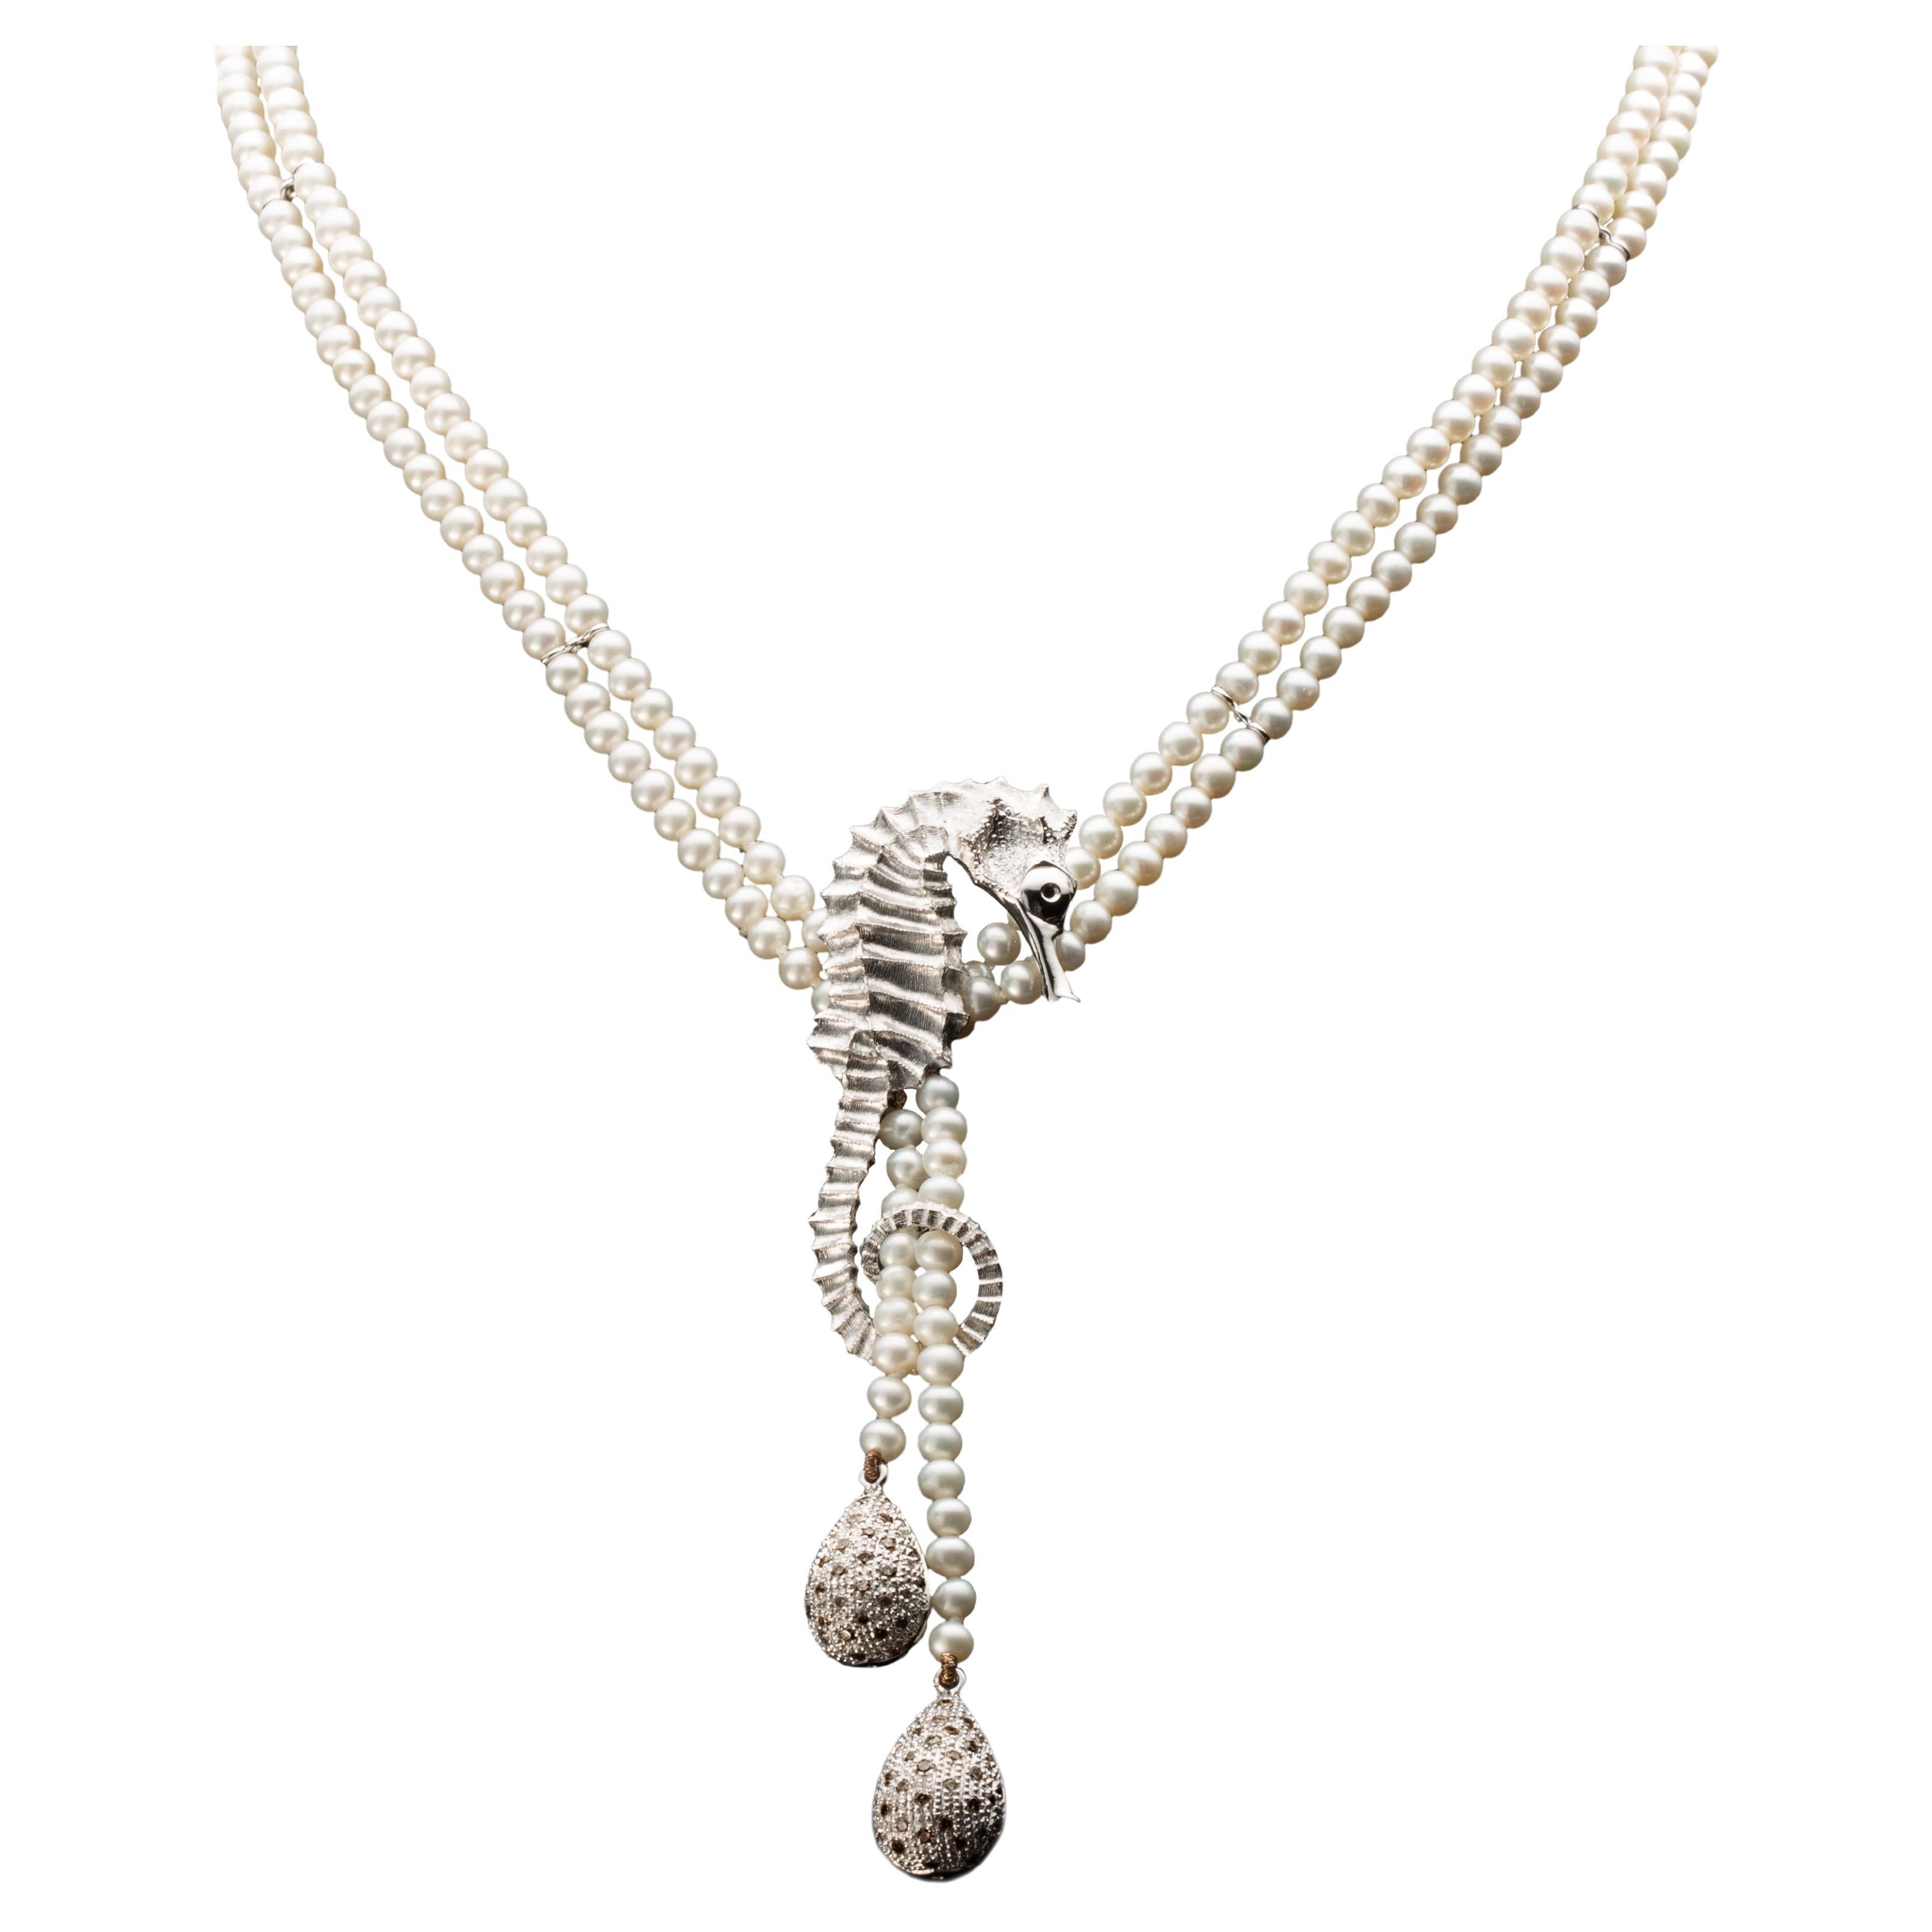 Seahorse Necklace with Freshwater Pearls, Diamond Pavè Drops in 18kt White Gold